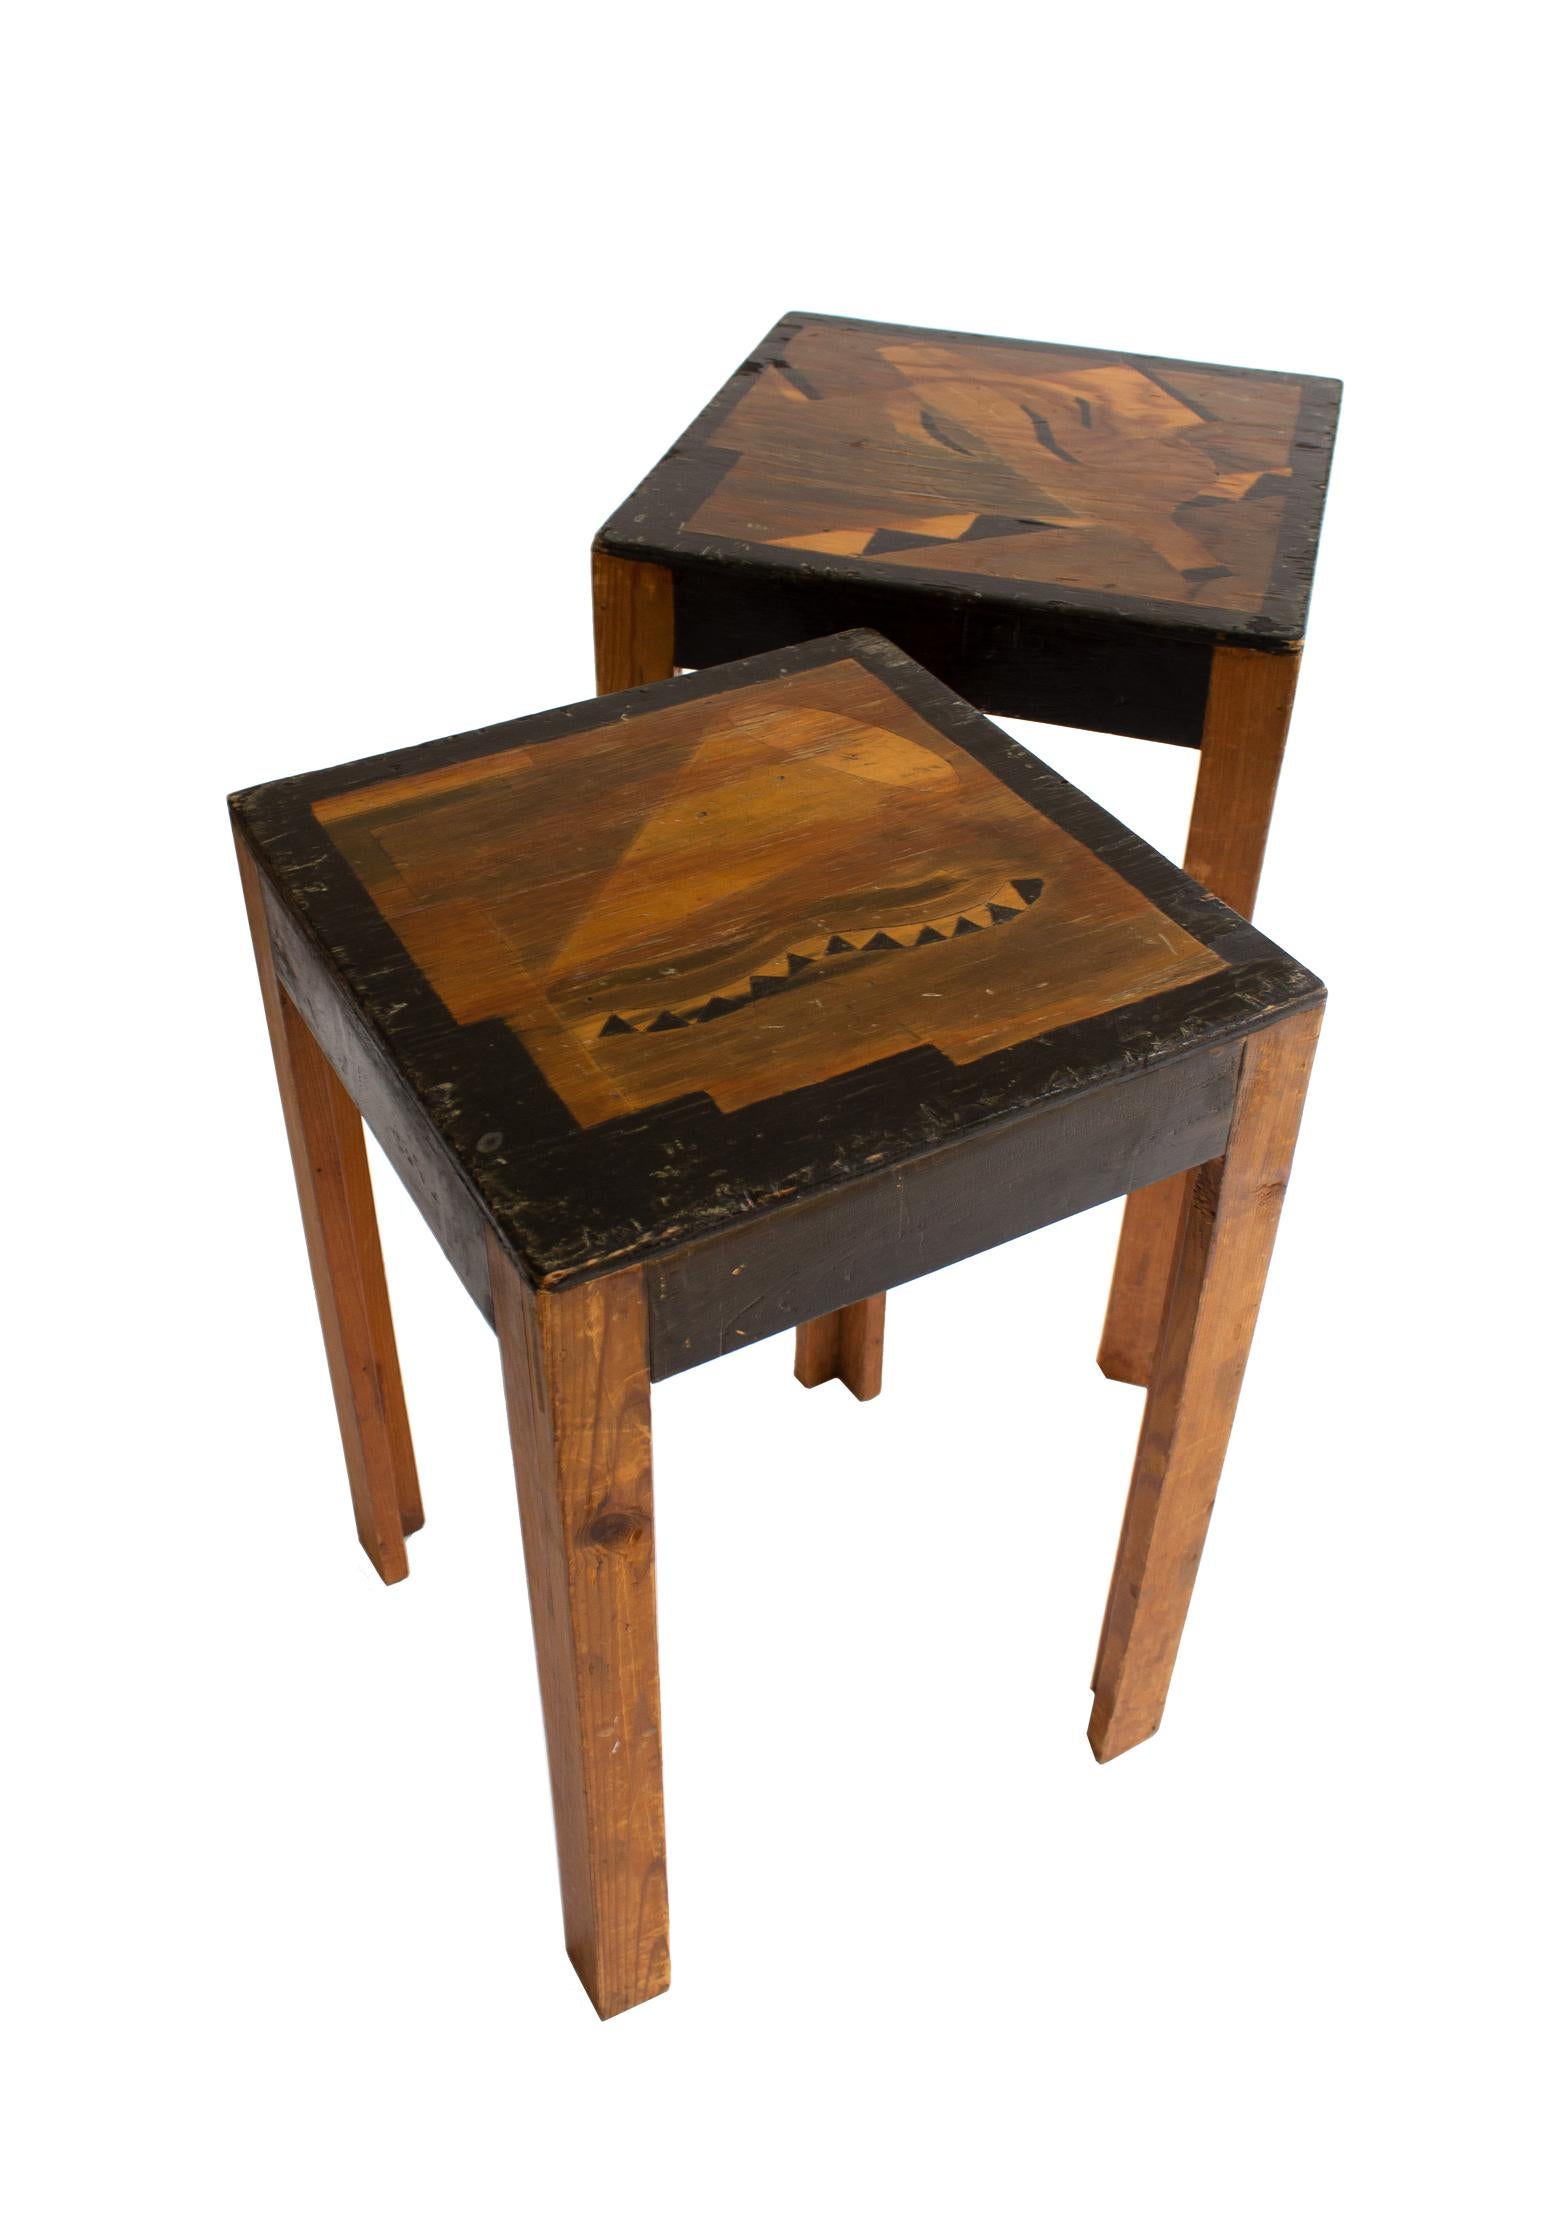 Two charming, Art Deco, nesting tables made of unknown Swedish artist in 1930s-1940s.
The layout and design of the table top is inspired by the genre of abstract art and are bound to look great in a home combined with multiple curiosity things.